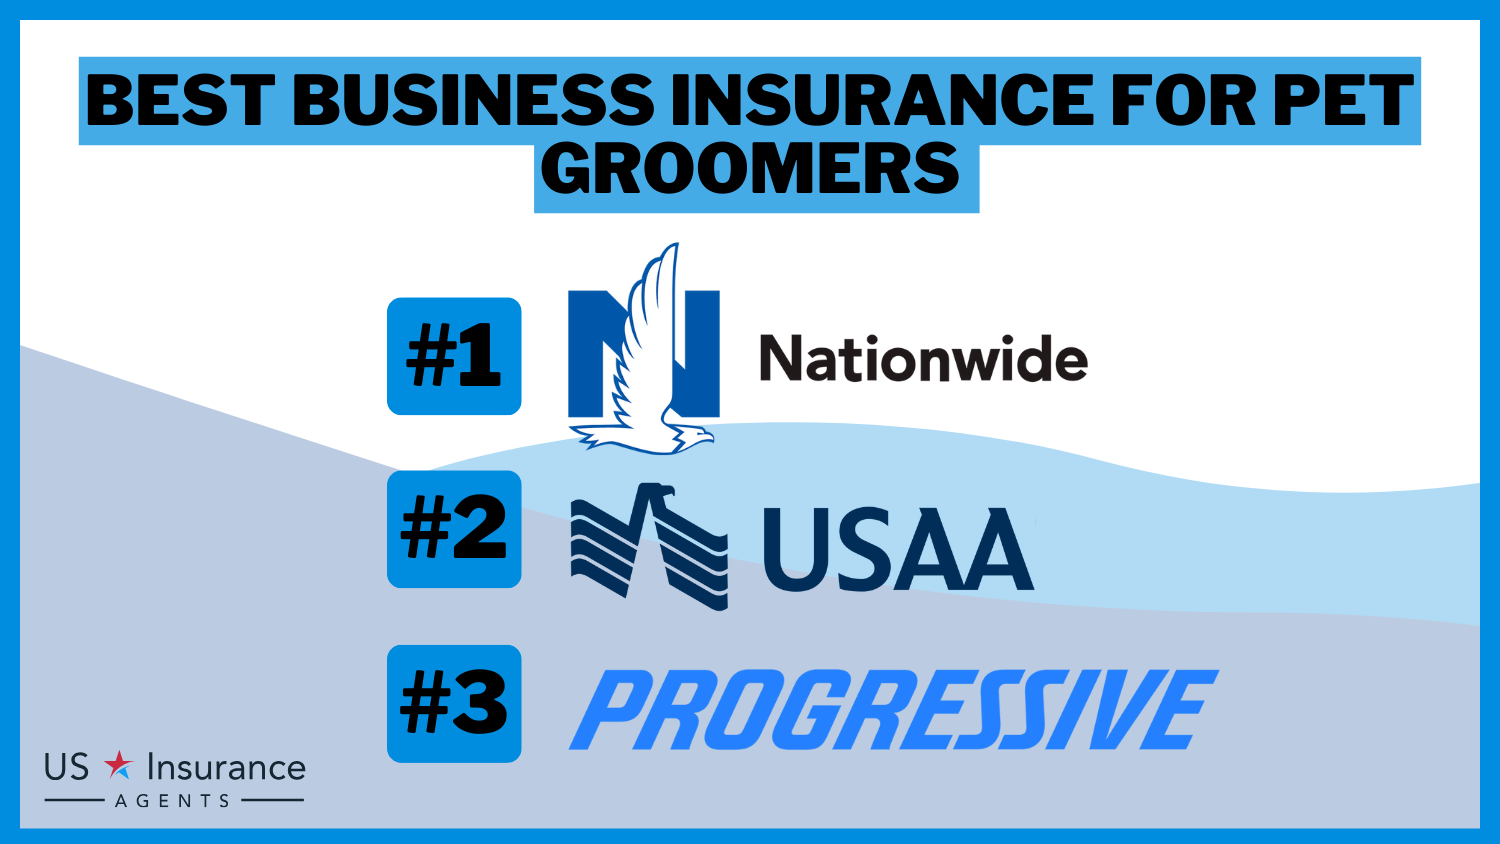 3 Best Business Insurance for Pet Groomers: Nationwide, USAA, and Progressive.